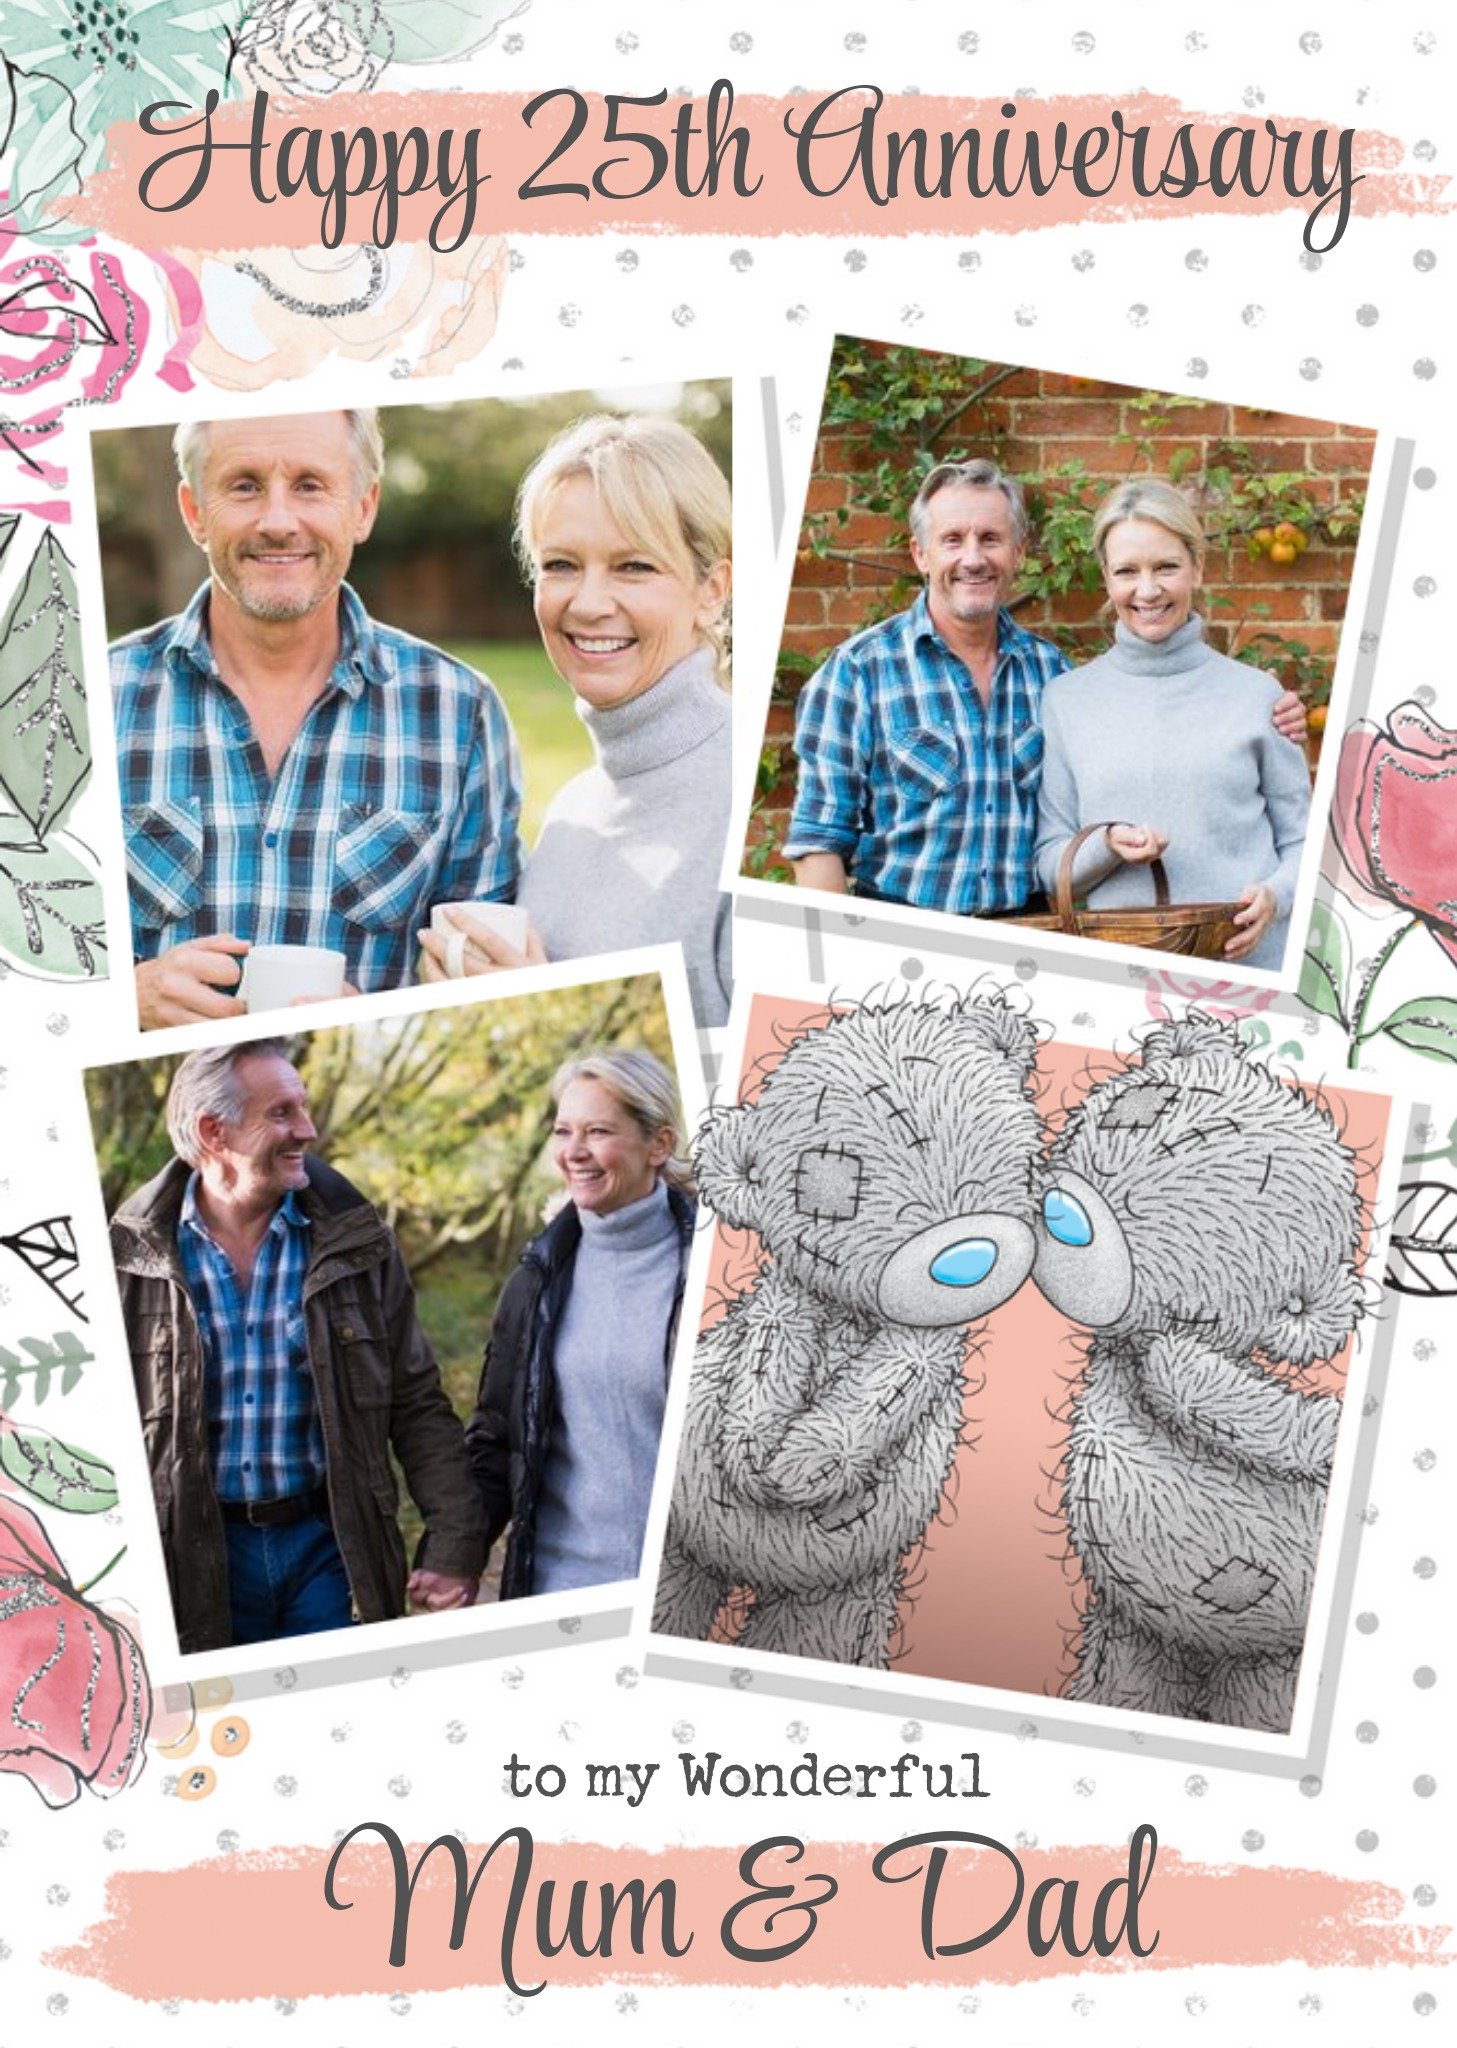 Me To You Tatty Teddy 25th Anniversary Photo Upload Card For Mum & Dad Ecard